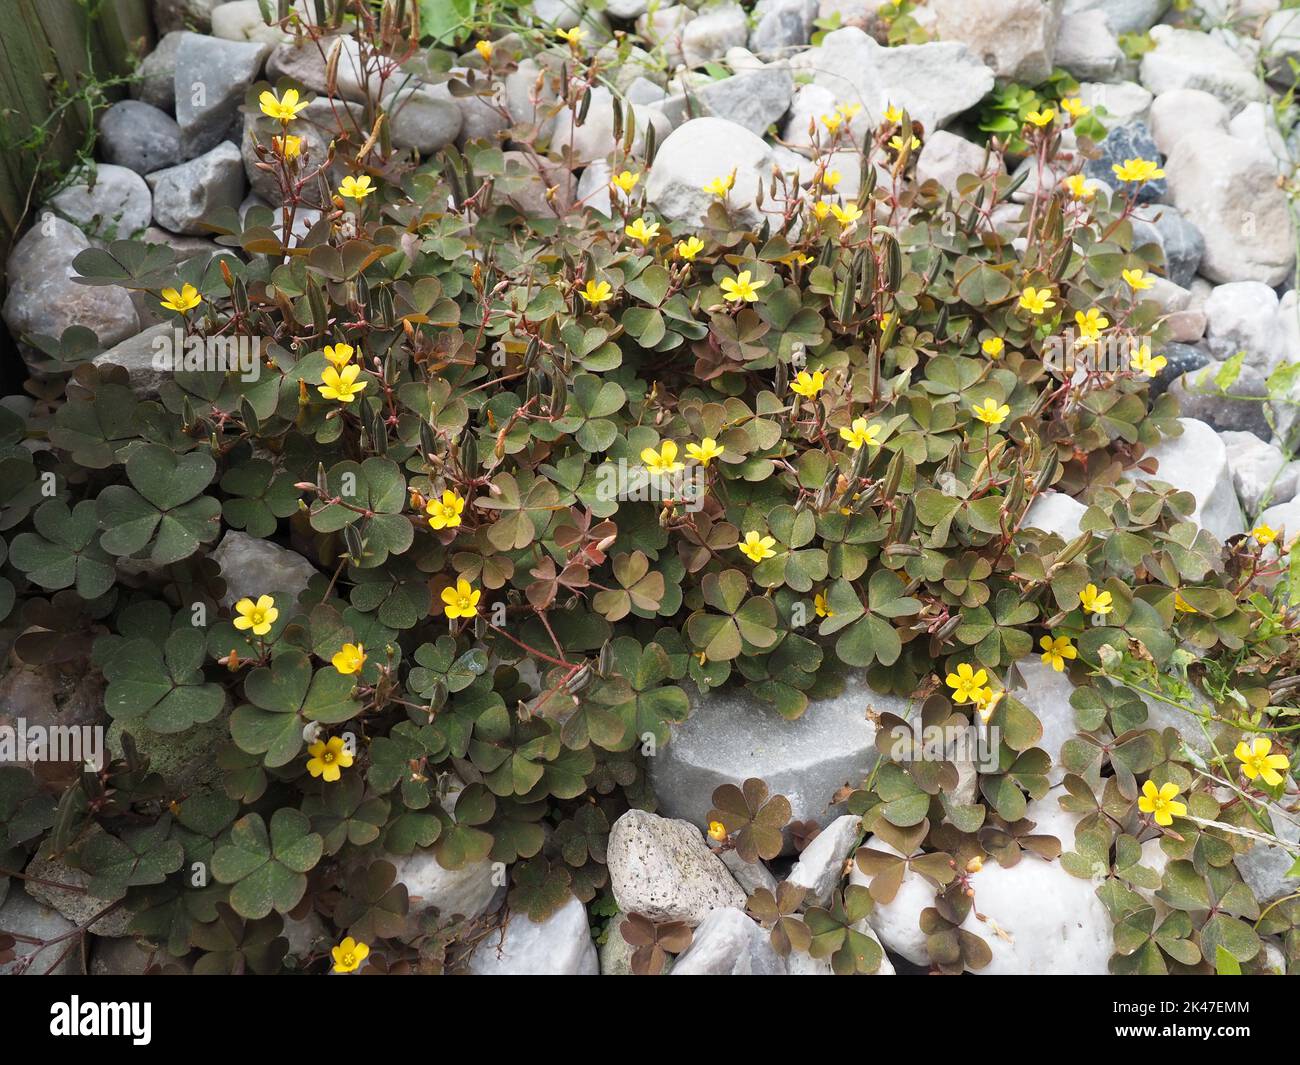 small oxalis vulcanicola plant with yellow flowers growing among white pebbles in an urban park Stock Photo